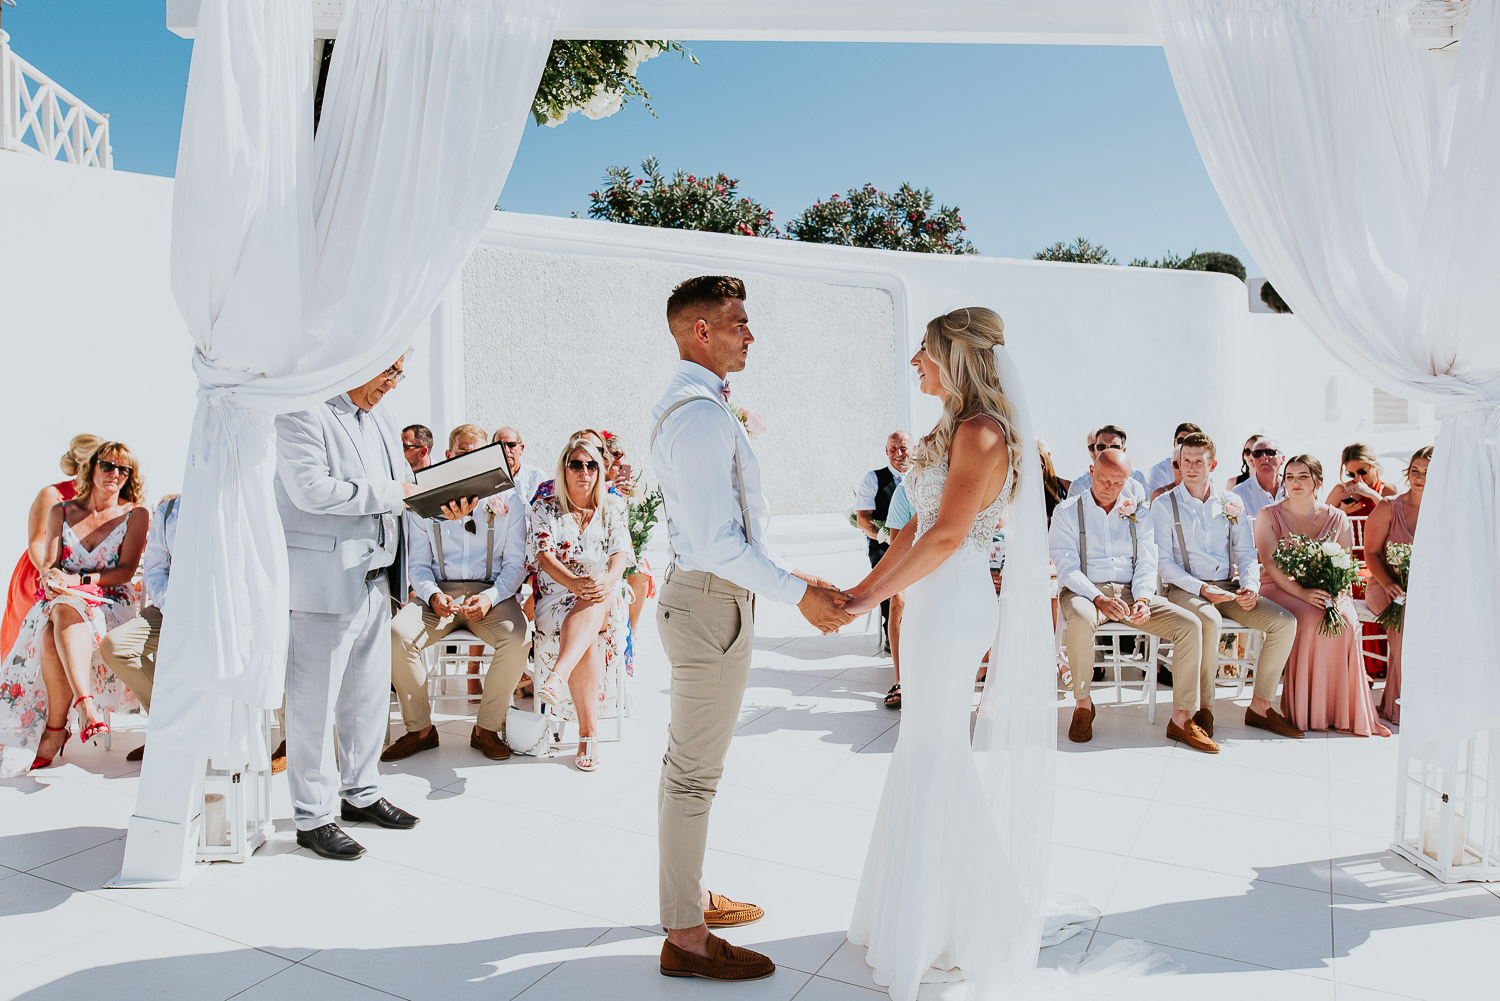 Wedding photographer Santorini: bride and groom holding hands under the gazebo with the guests sat in the background.